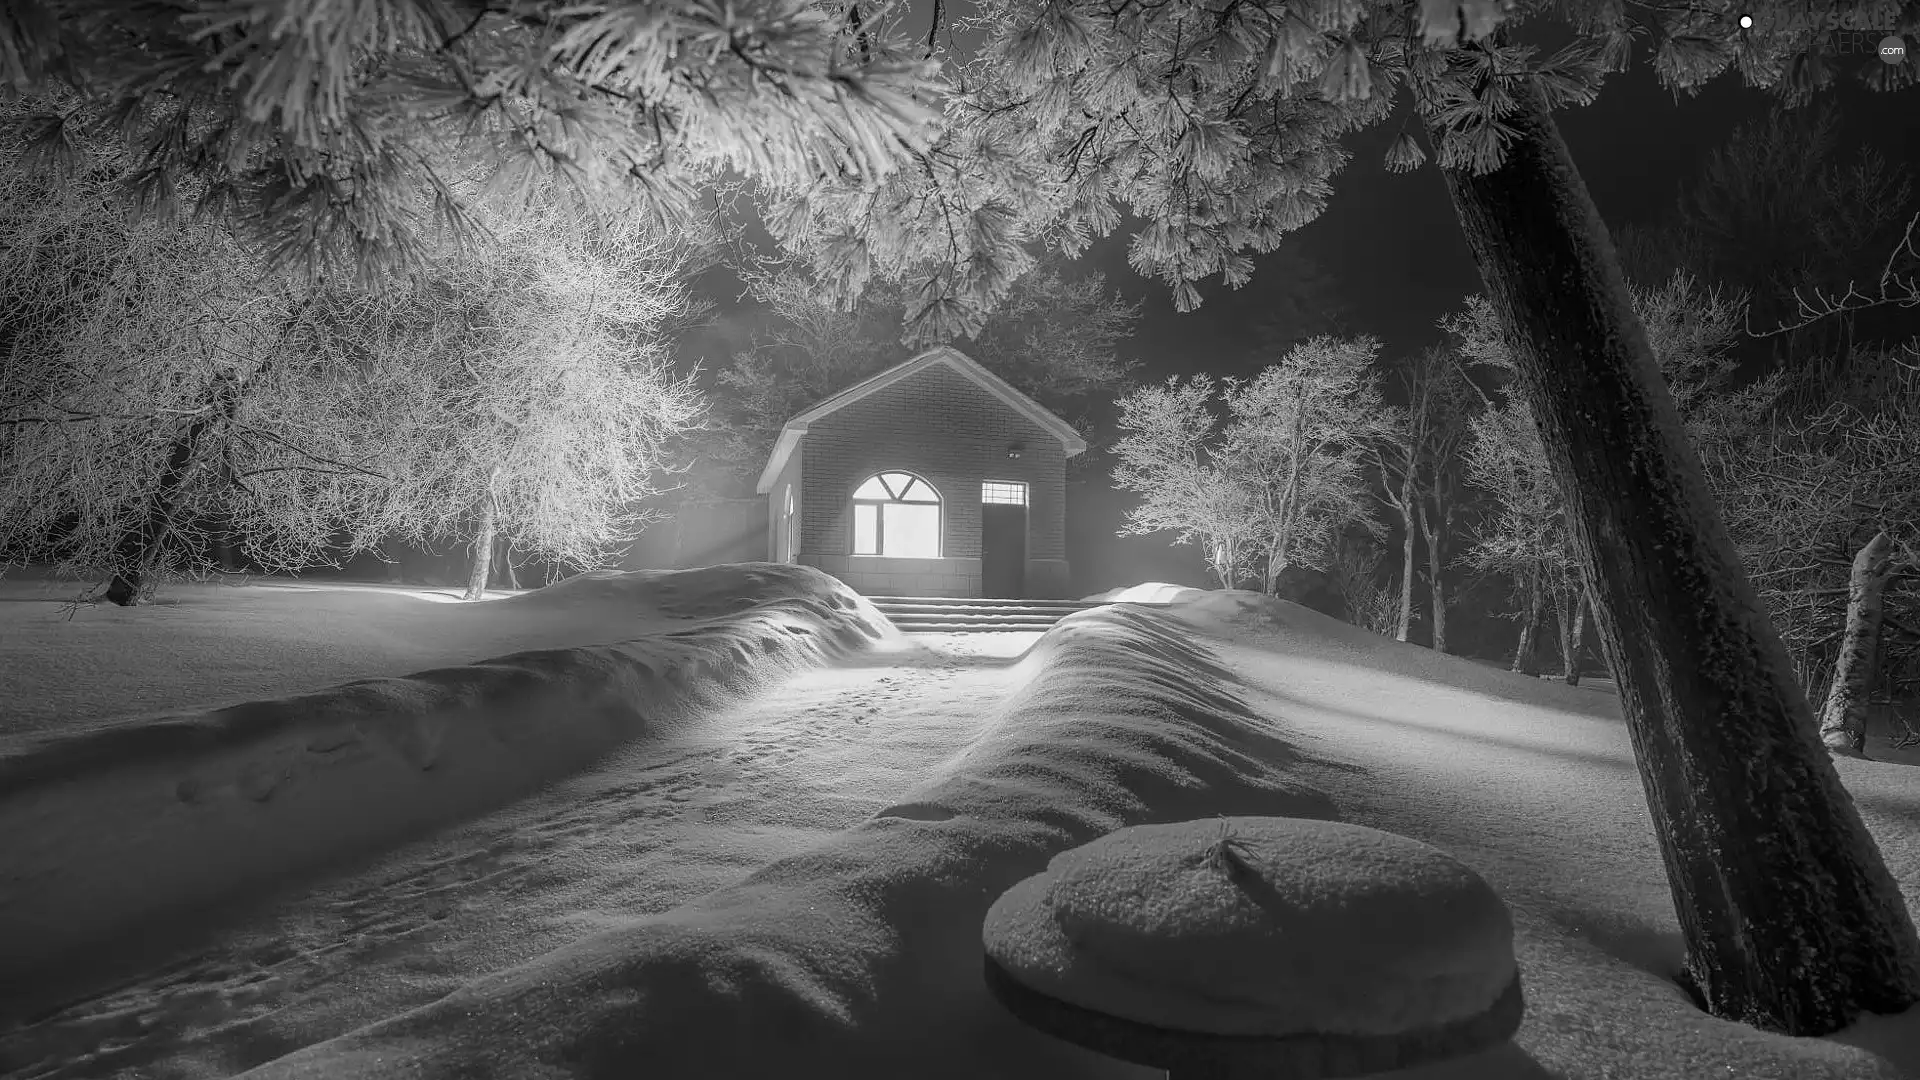 Path, Floodlit, trees, house, winter, Snowy, viewes